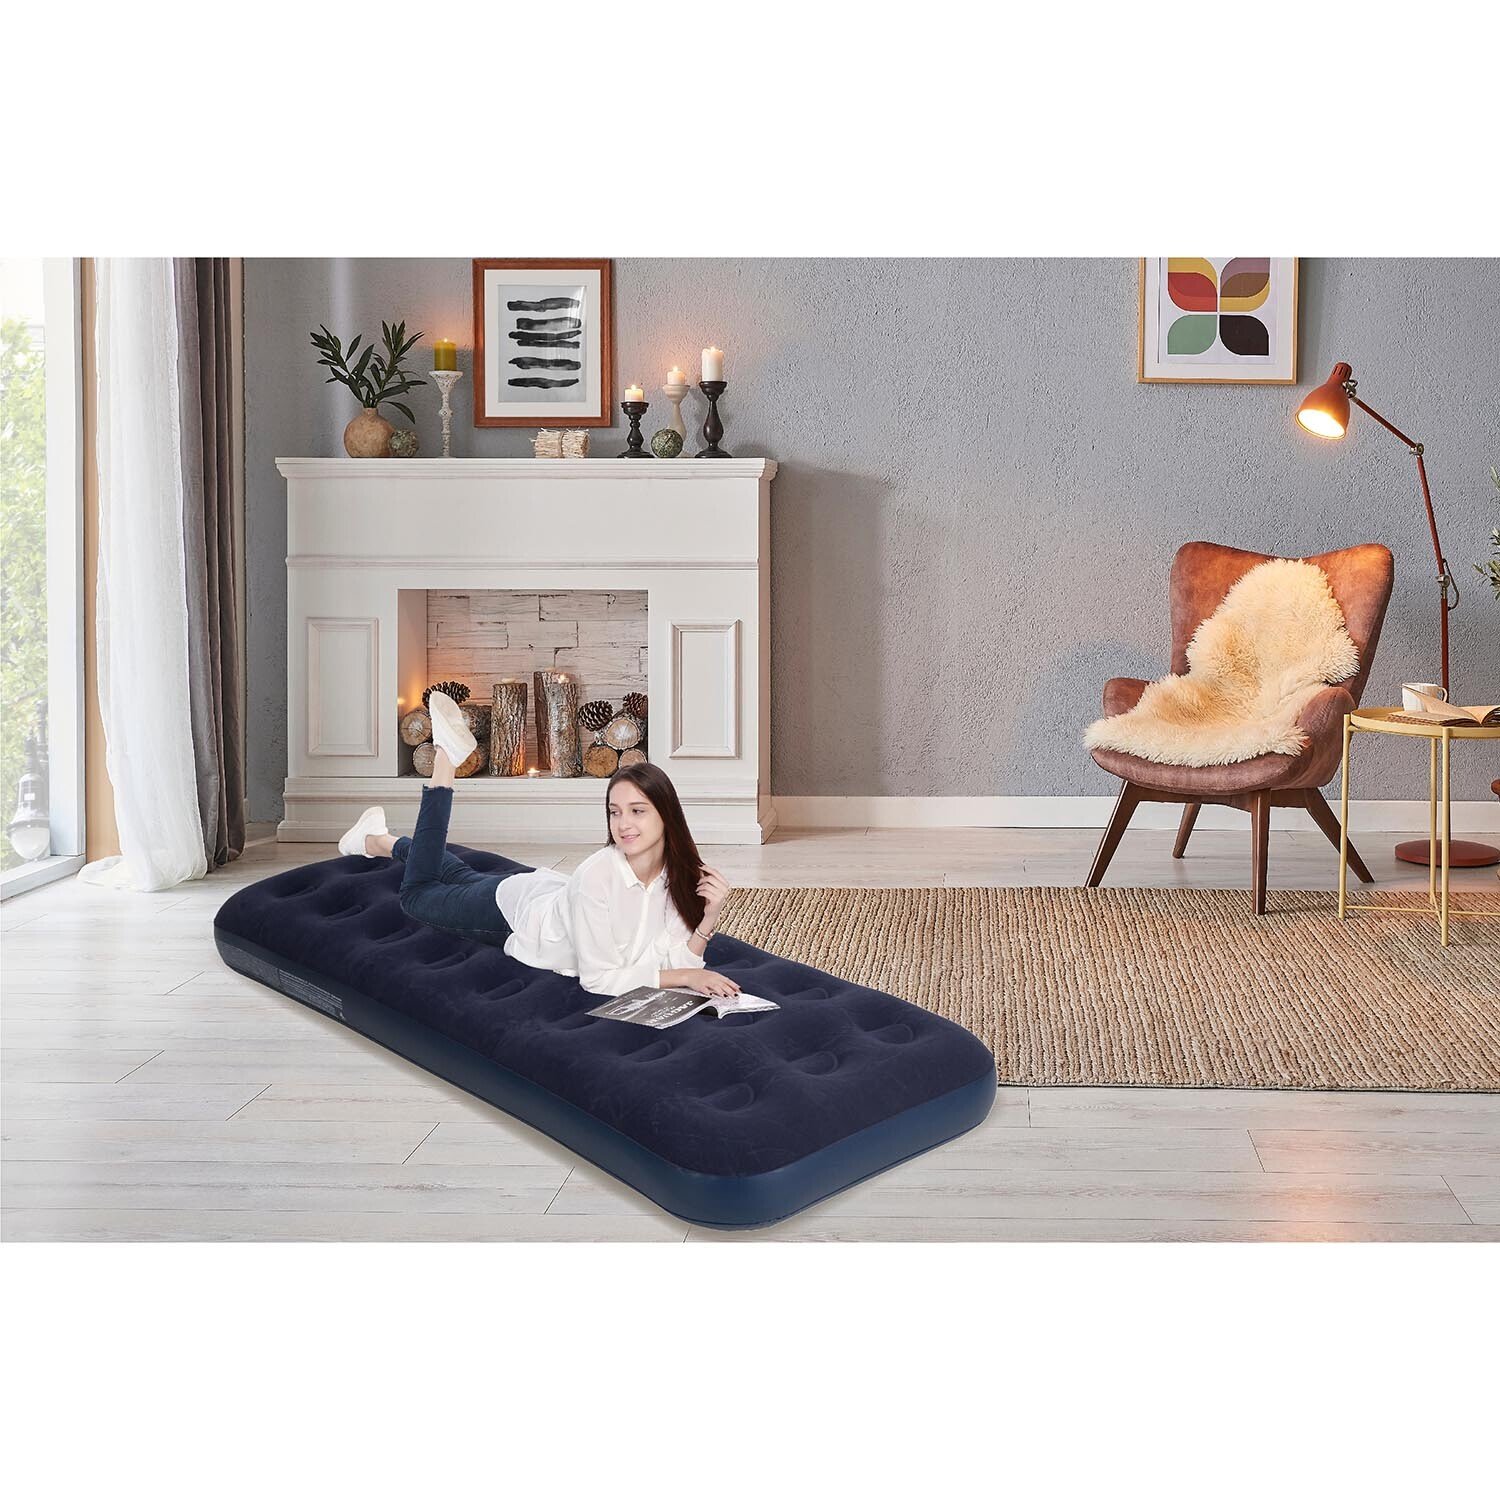 Avenli Single Air Bed Image 2